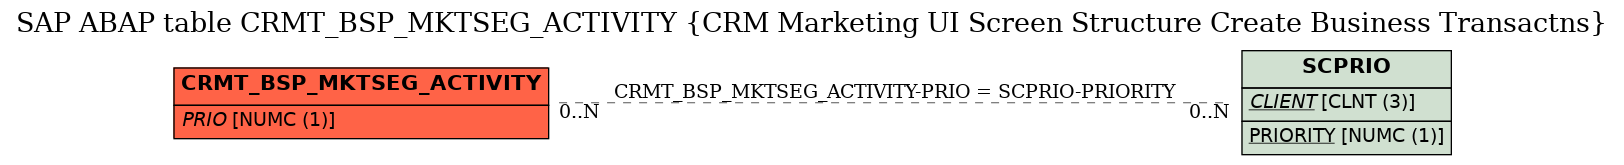 E-R Diagram for table CRMT_BSP_MKTSEG_ACTIVITY (CRM Marketing UI Screen Structure Create Business Transactns)